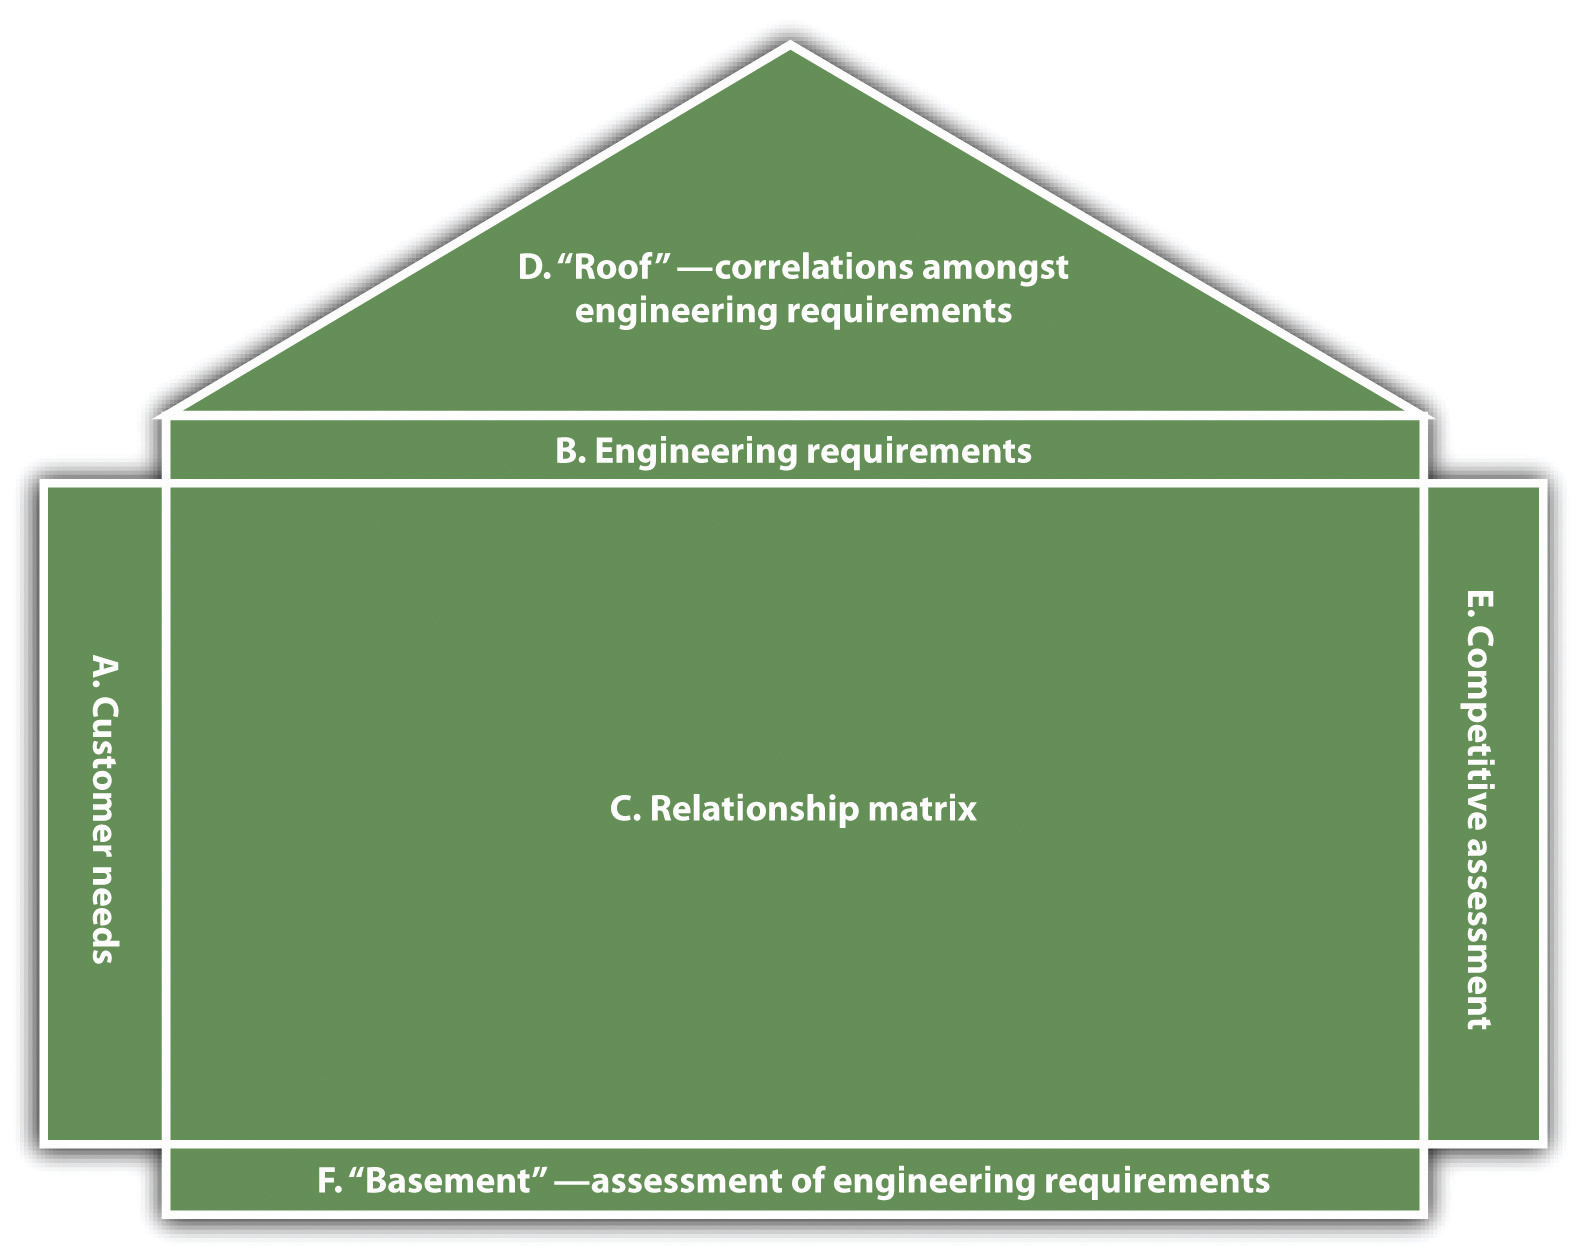 House of quality, a. customer needs, b. engineering requirements, c. relationship matrix, d. "roof" - correlations amongst engineering requirements, e. competitive assessment, f. "basement" - assessment of engineering requirements